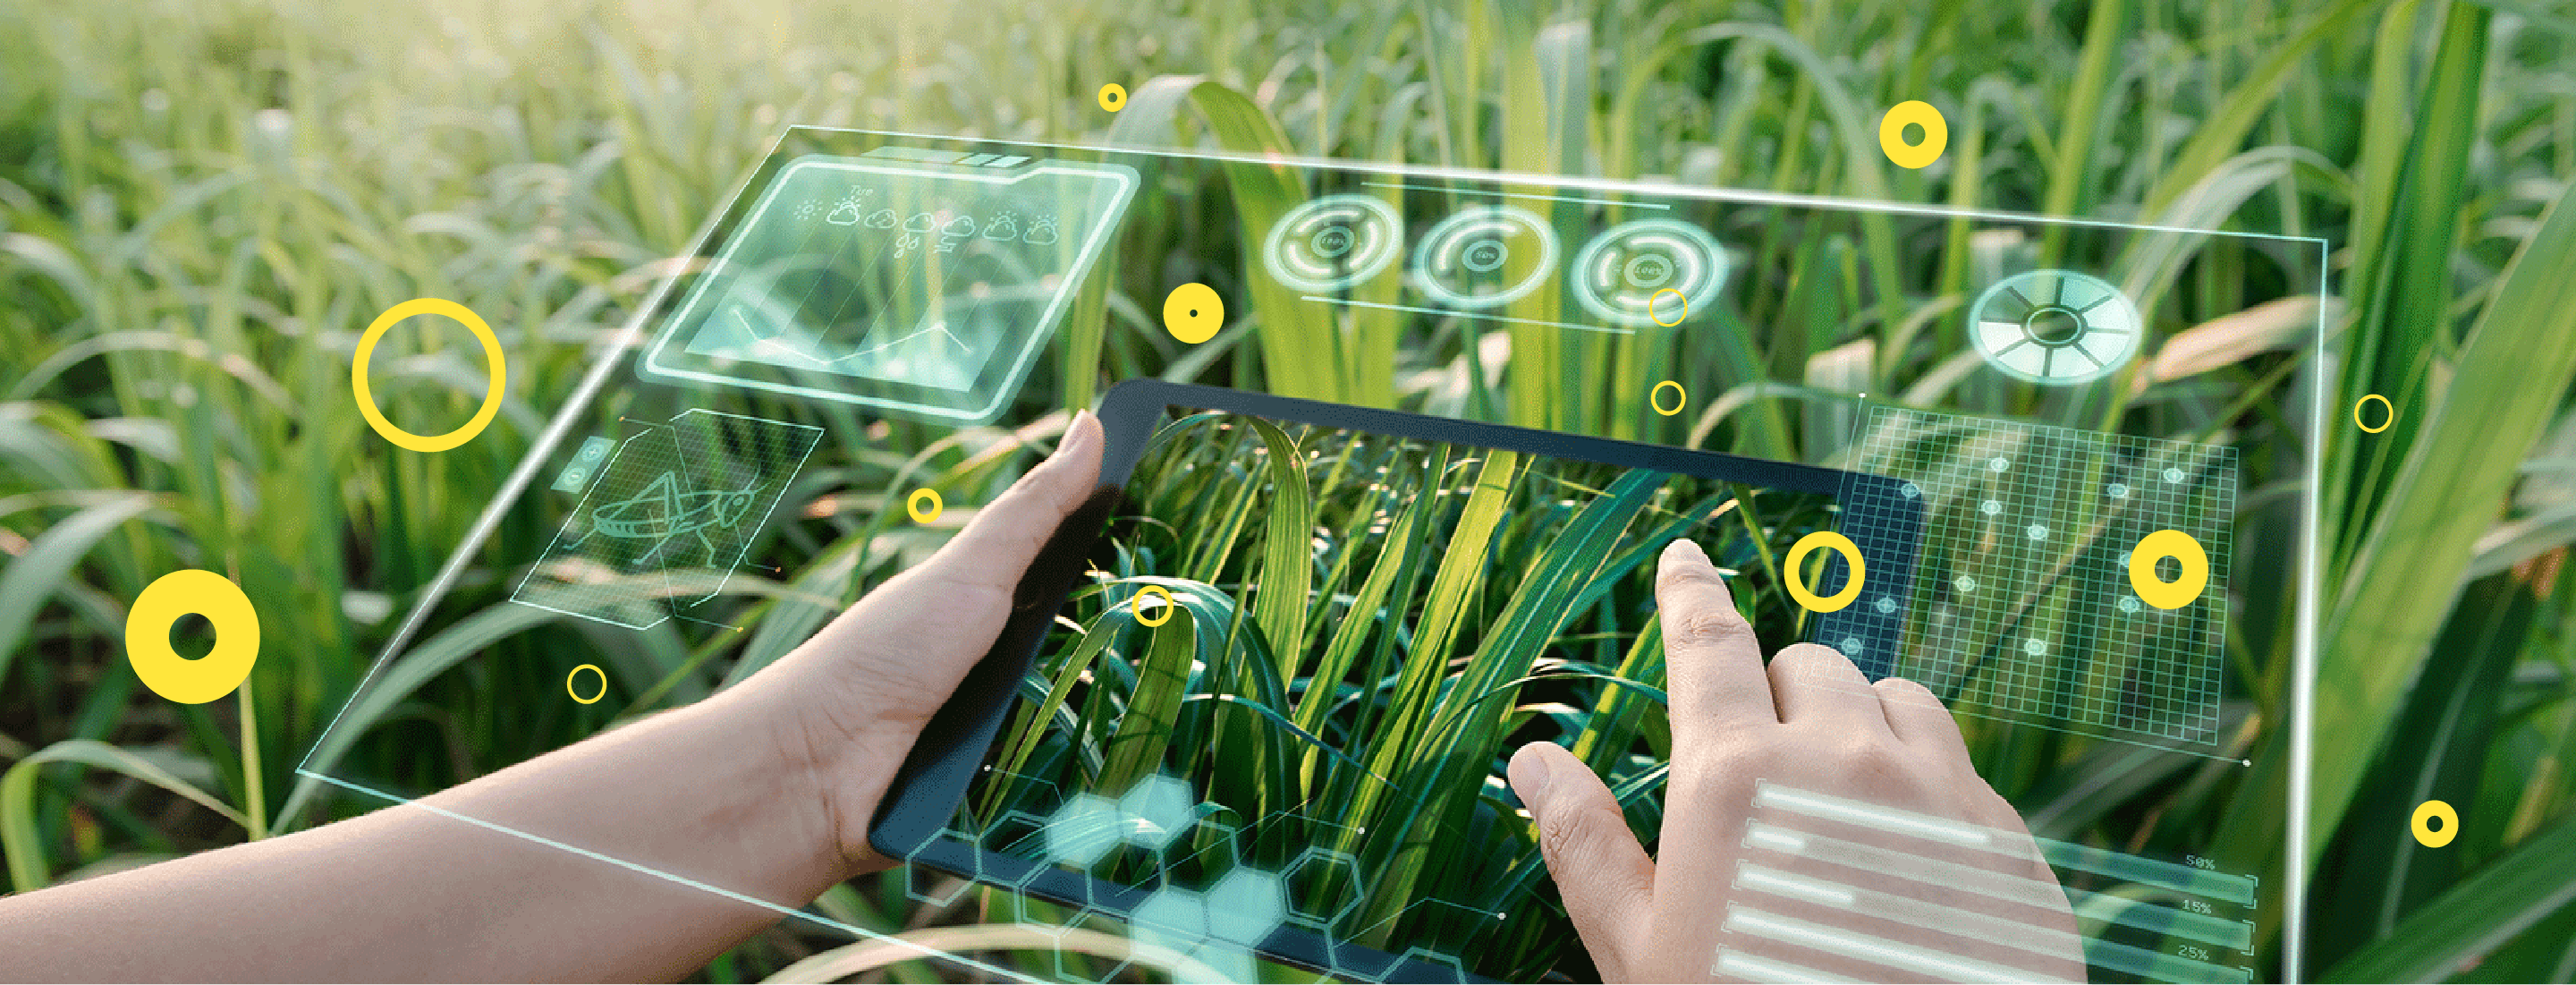 Tablet pointed at a plant, using augmented reality to show relevant data.